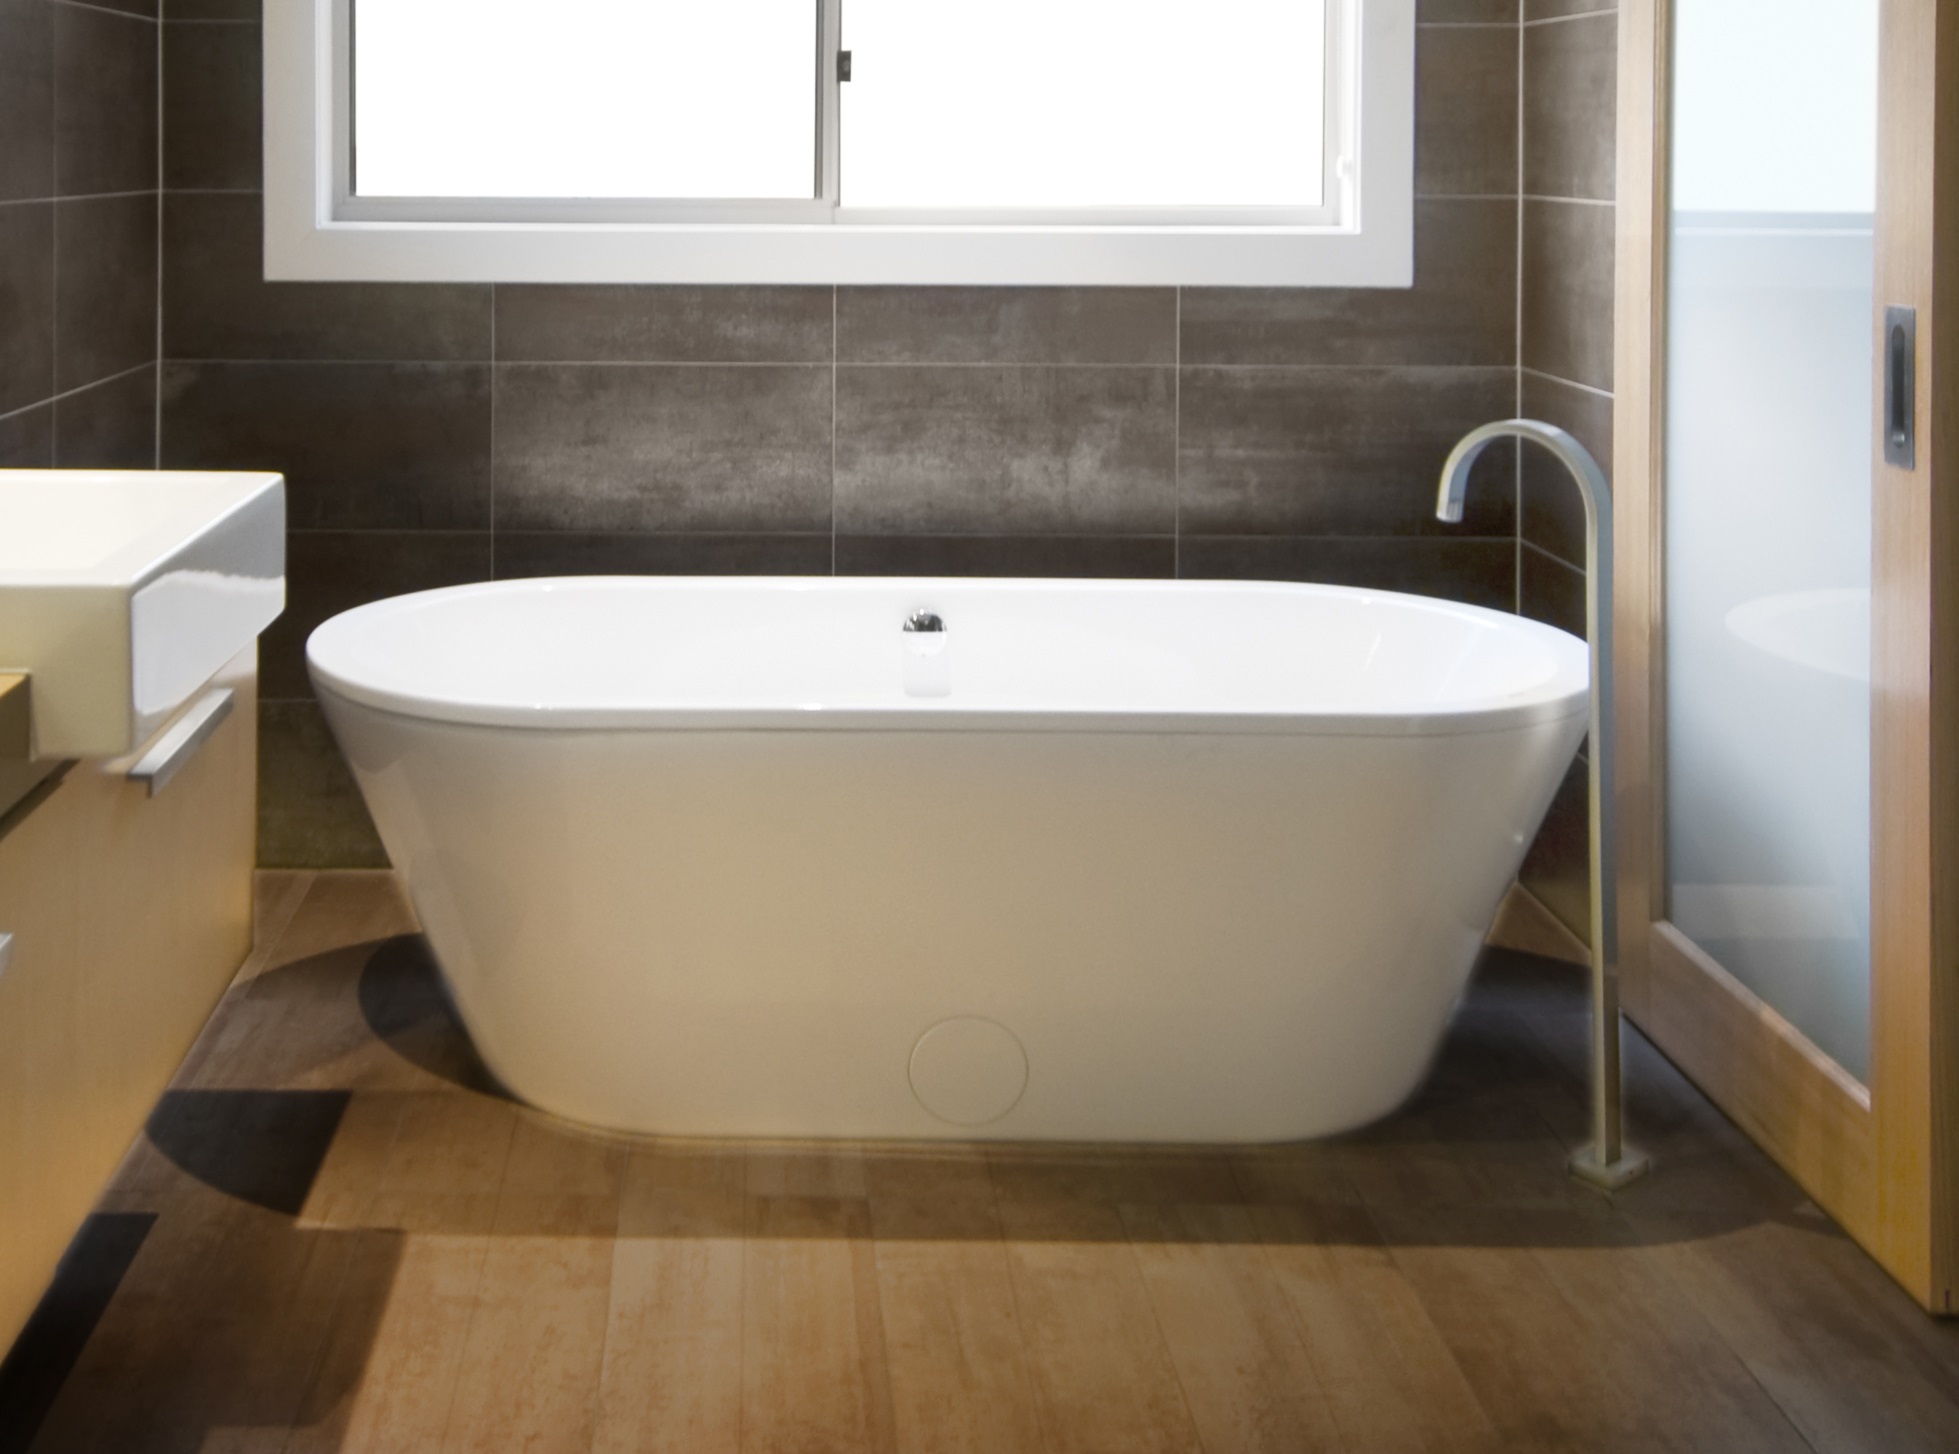 AquaPlank Mornington is suitable for bathrooms